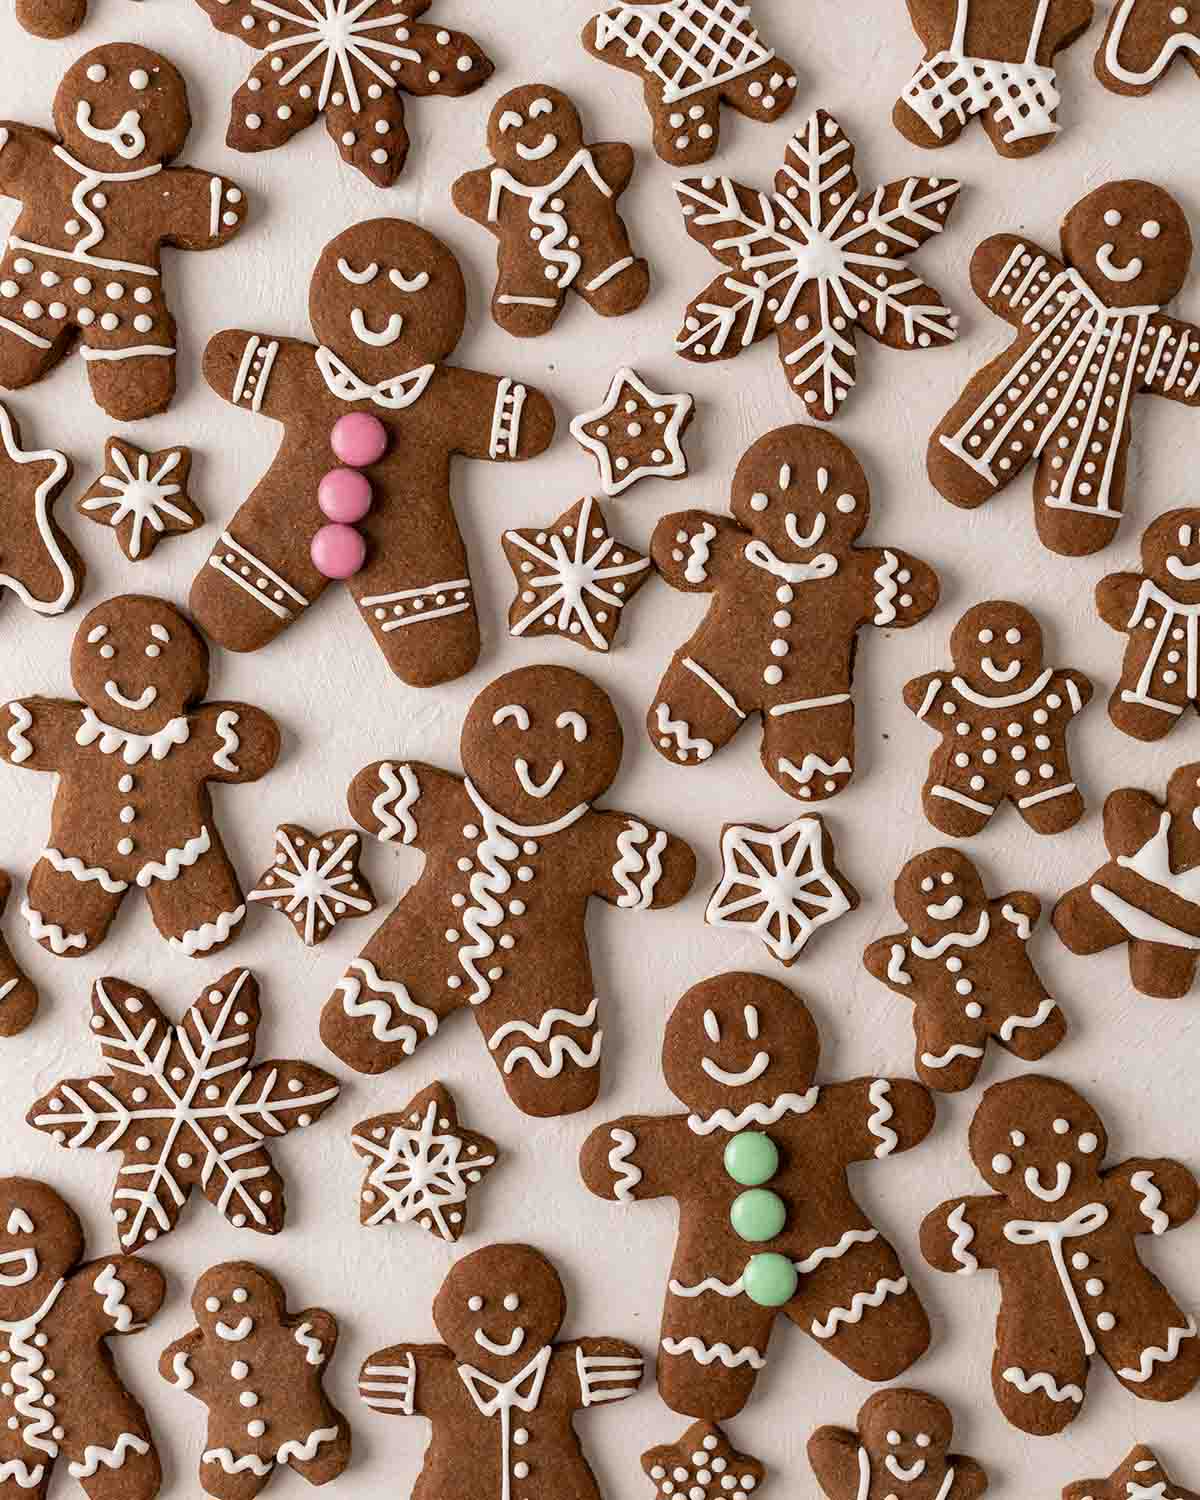 Flatlay of many vegan gingerbread cookies with varying sizes of gingerbread men and stars.